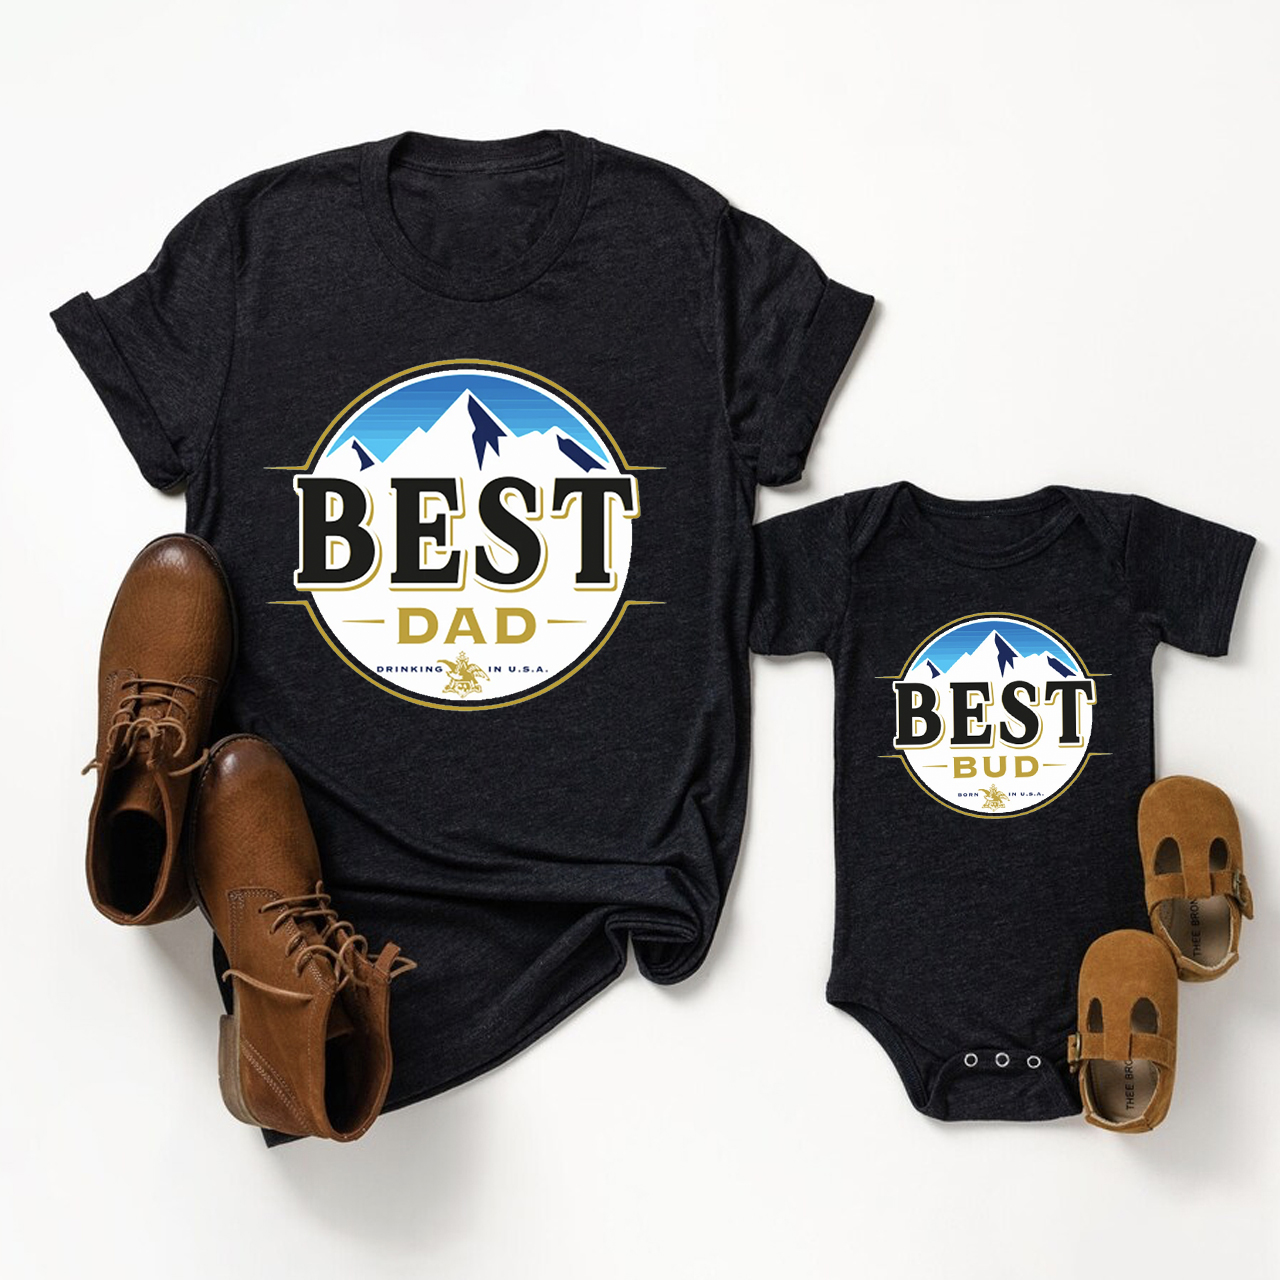 Best Drinking Born In USA Matching Father's Day Shirt